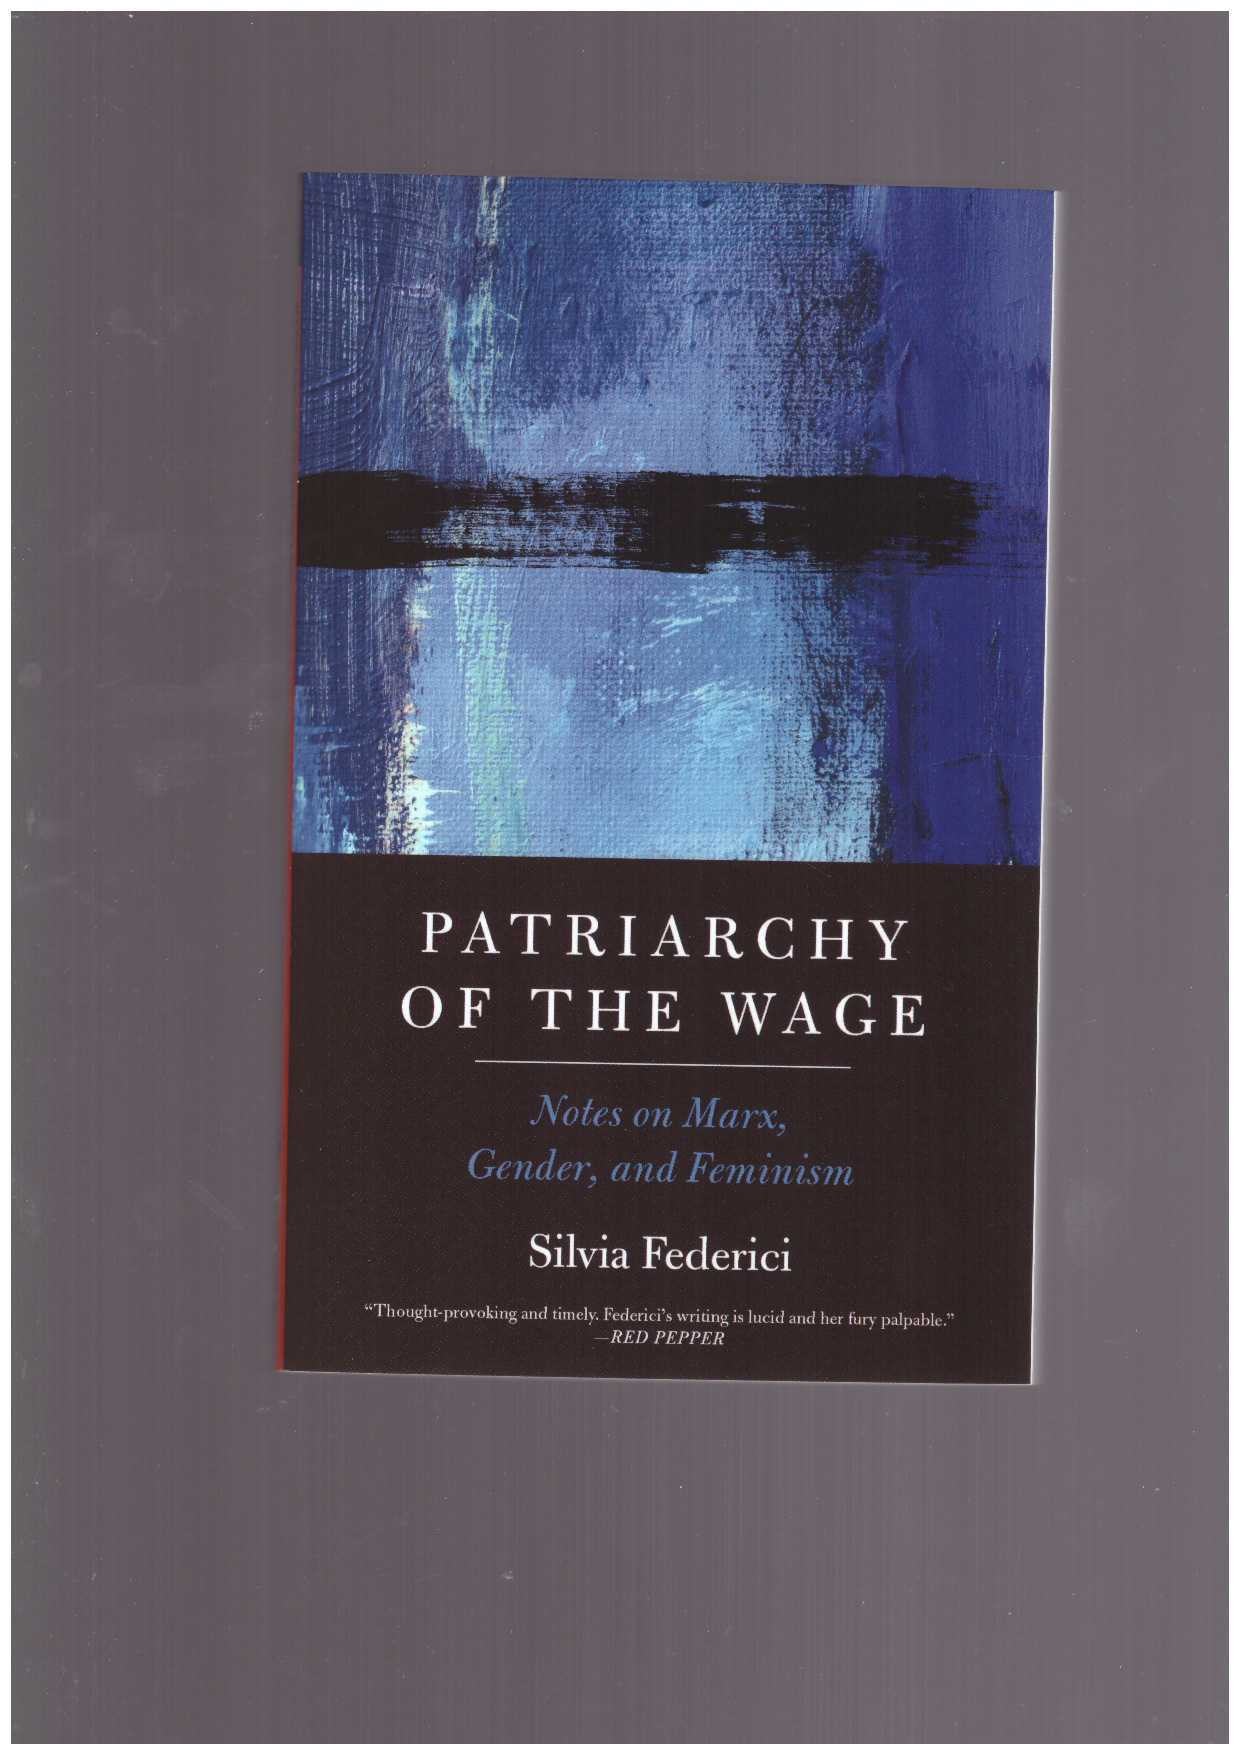 FEDERICI, Silvia - Patriarchy of the Wage. Notes on Marx, Gender, and Feminism